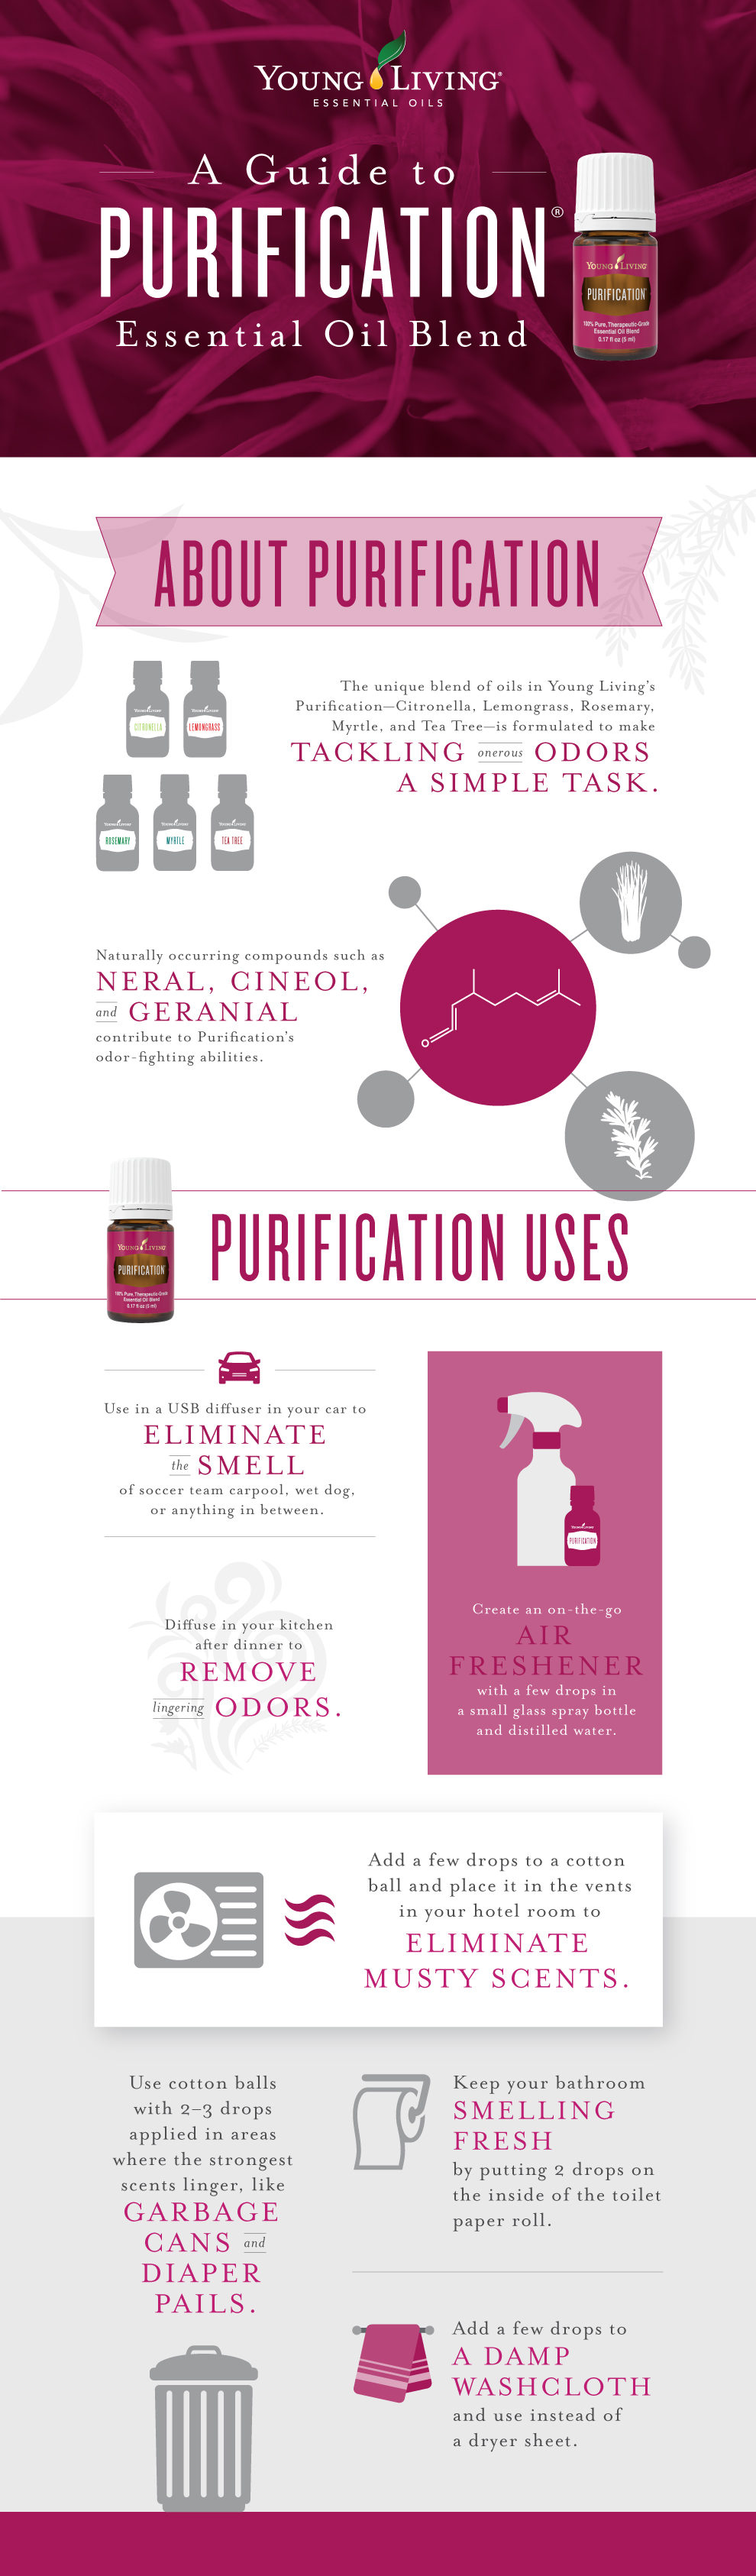 A guide to Purification infographic 